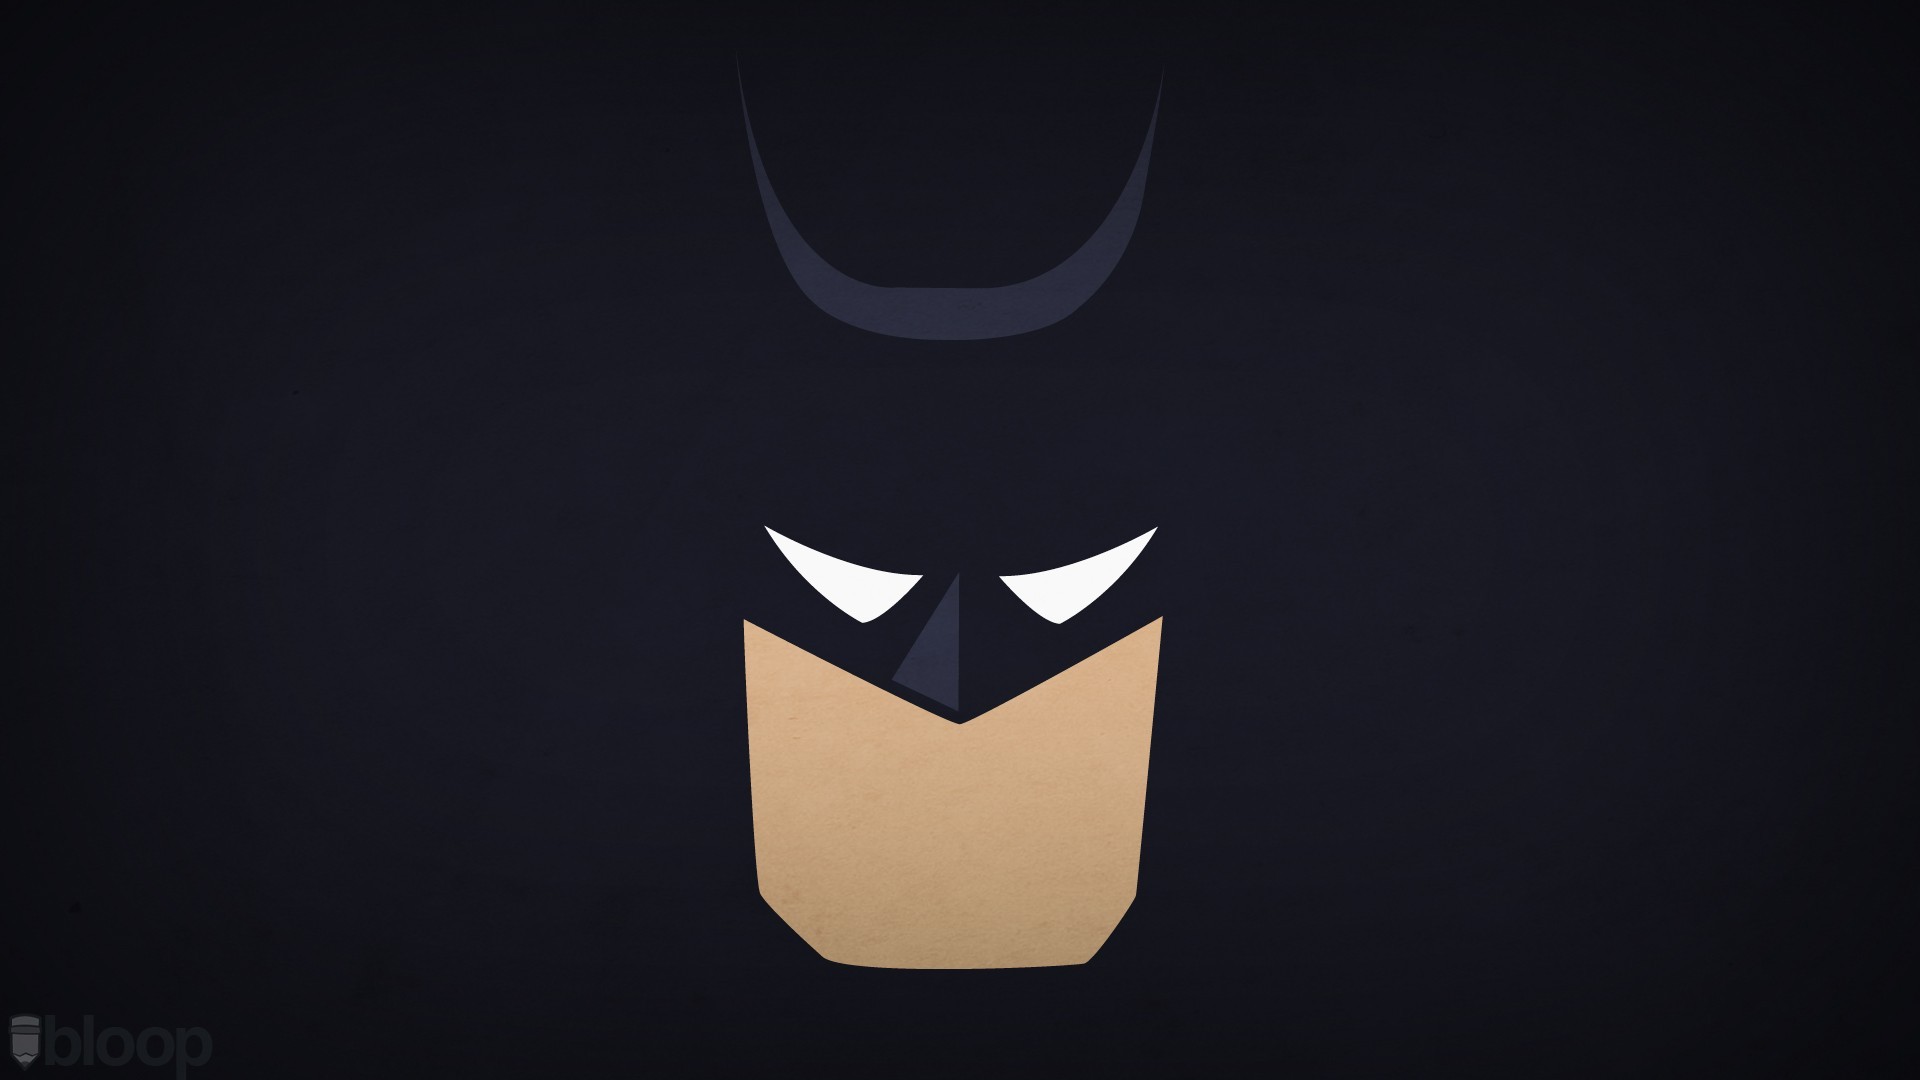 Minimalist Superhero Wallpapers more inside xpost from rwallpapers 1920x1080